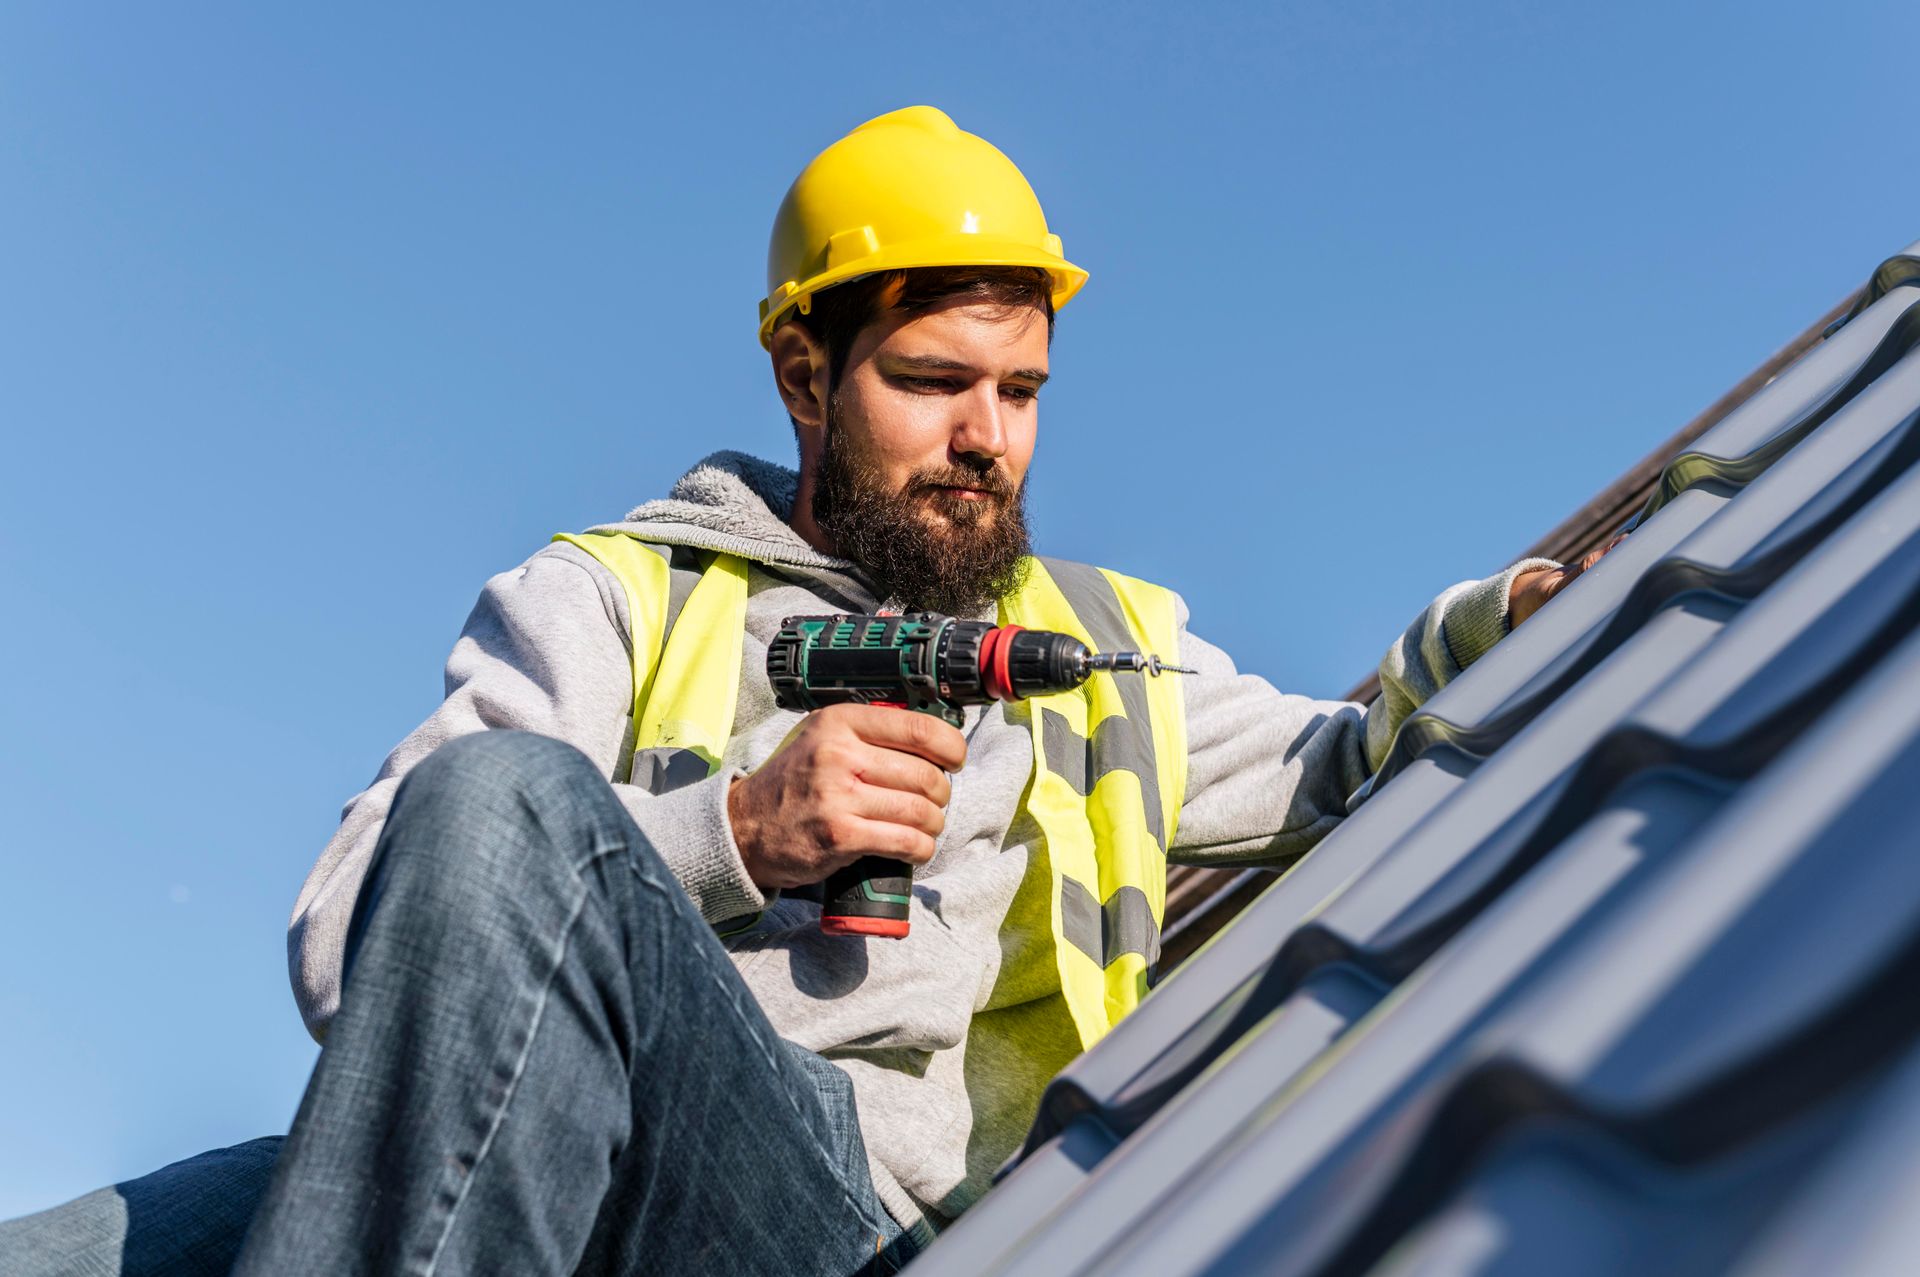 Man working at roof while use a tool